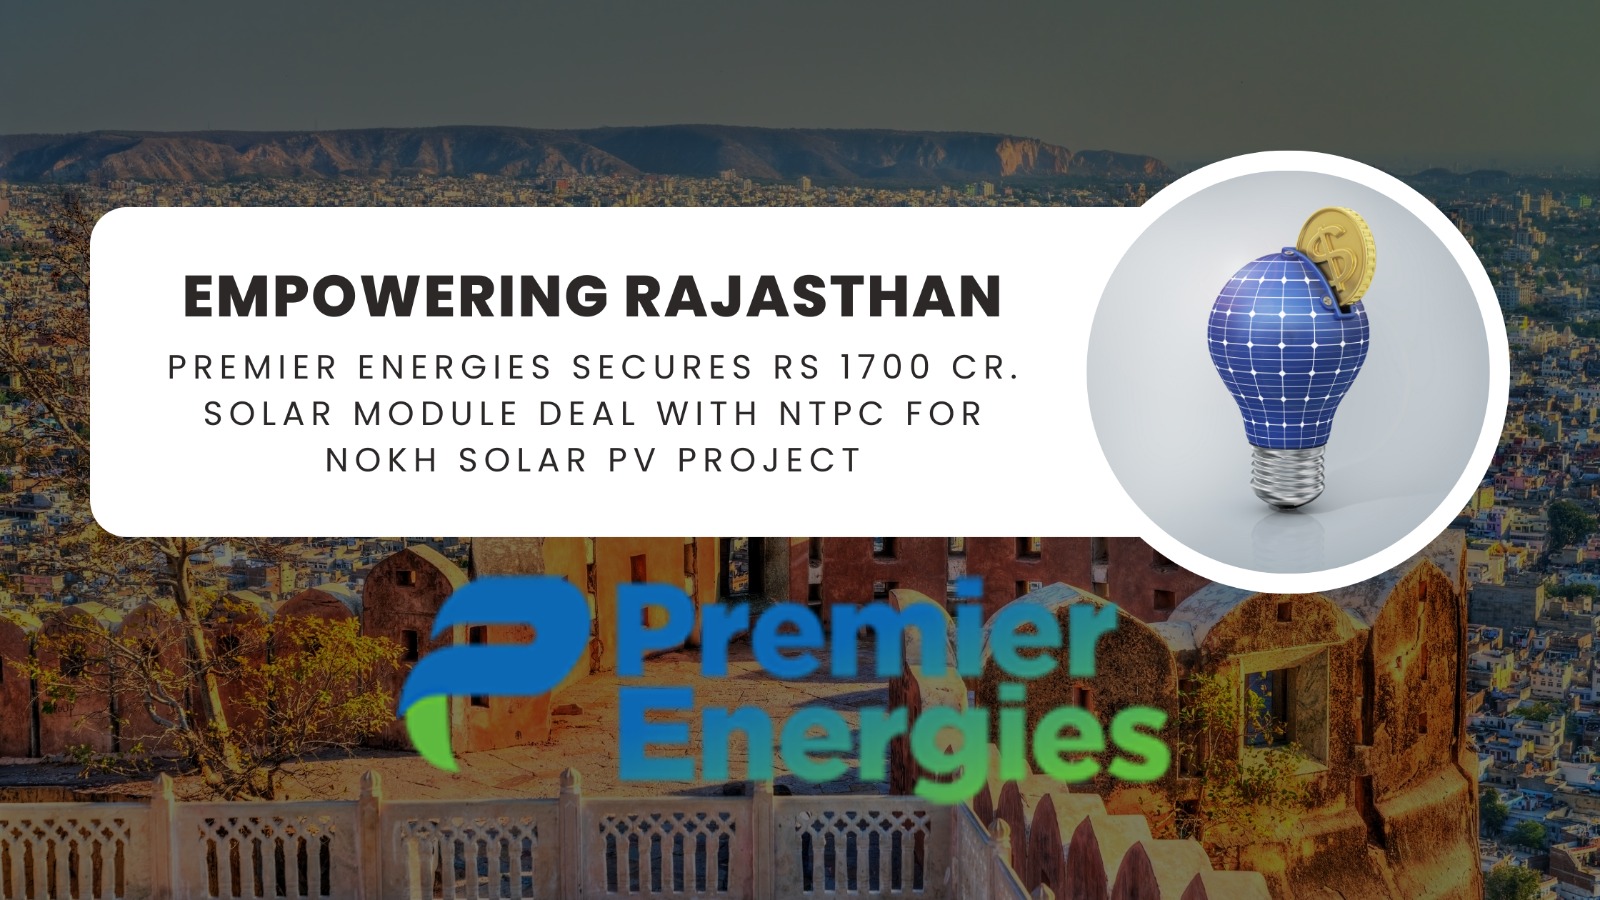 “Let’s Go Solar”: Premier Energies bags Rs 1700 cr. Solar module supply order from NTPC Limited for Nokh Solar PV Project in Rajasthan